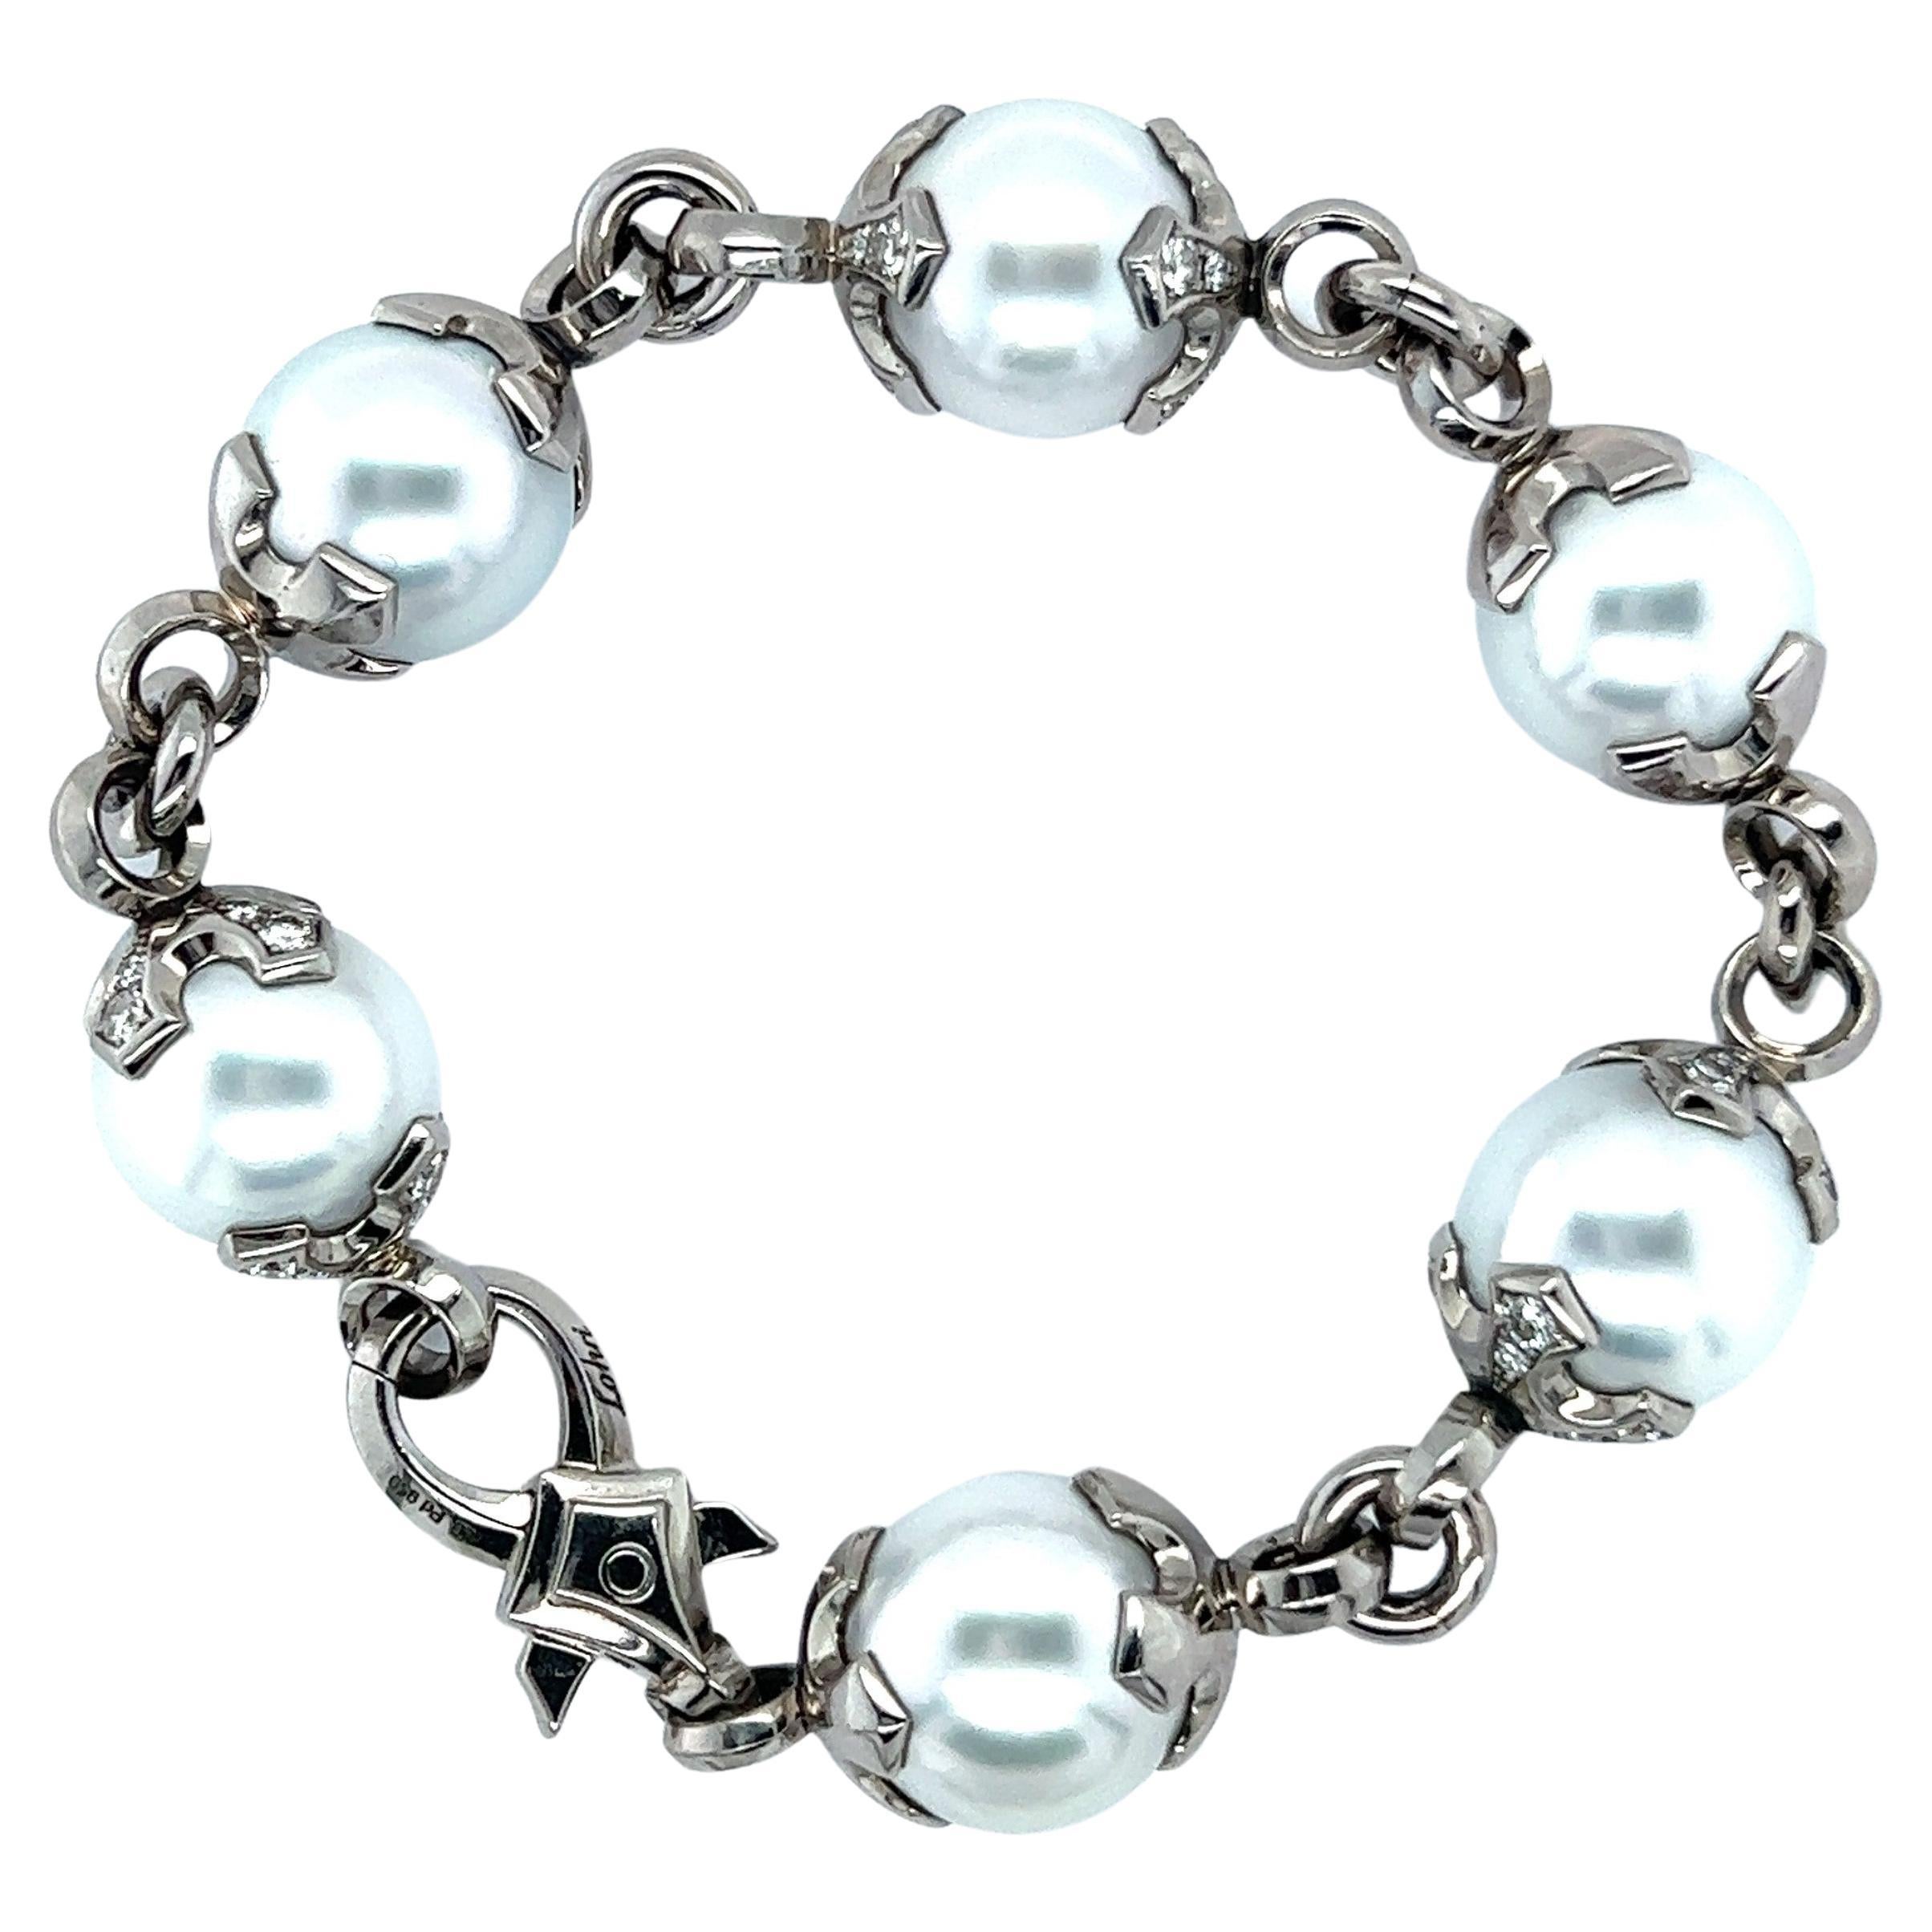 Bracelet with South Sea Cultural Pearls in Palladium 950 For Sale